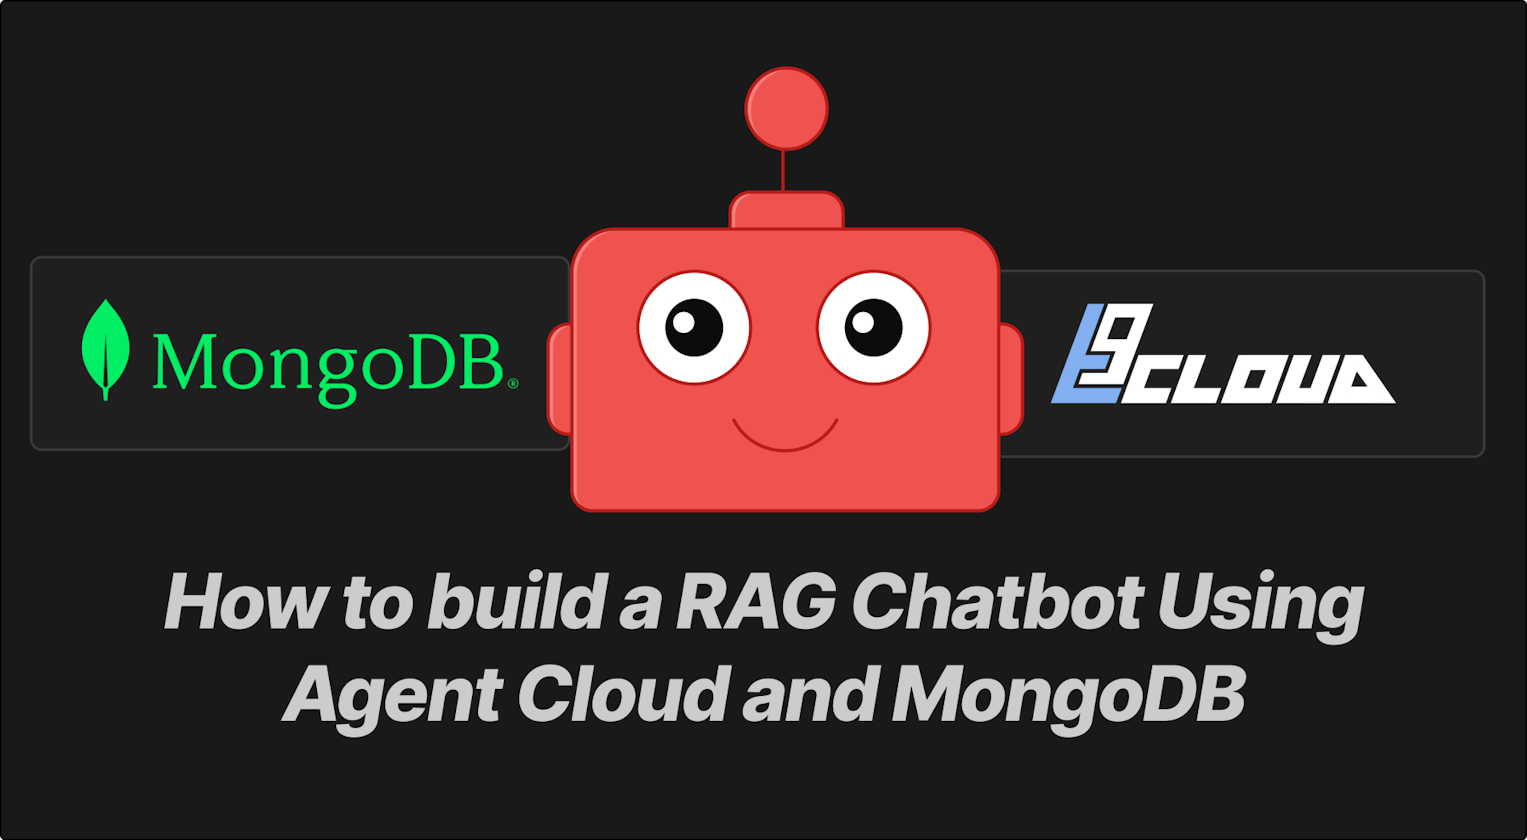 How to Build a RAG Chatbot with Agent Cloud and MongoDB